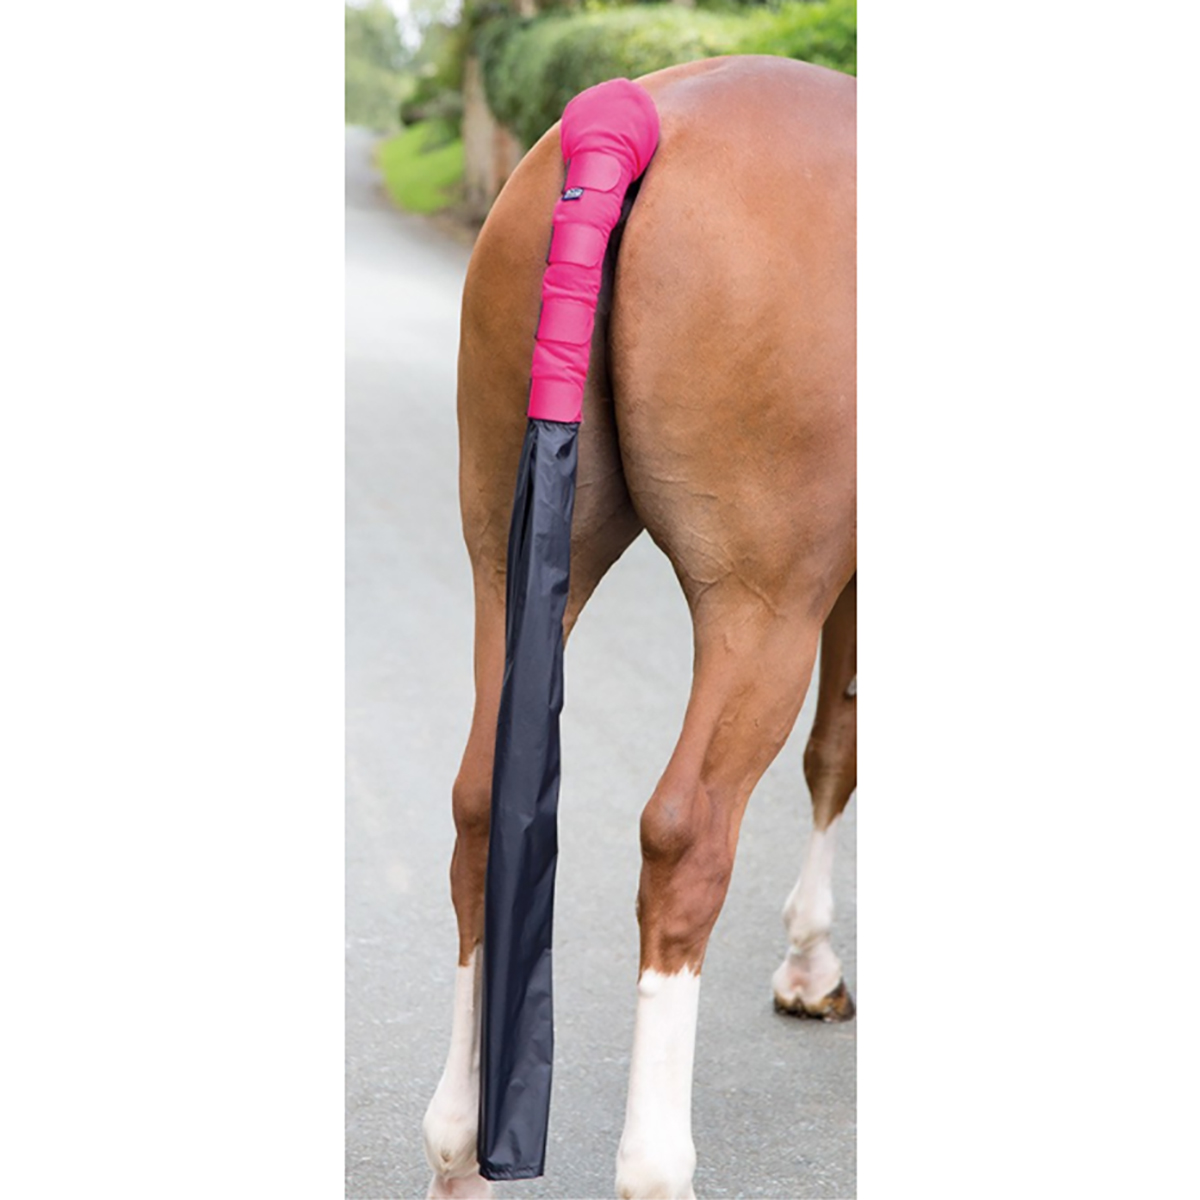 Shires Arma Padded Horse Tail Guard in Purple onesize 